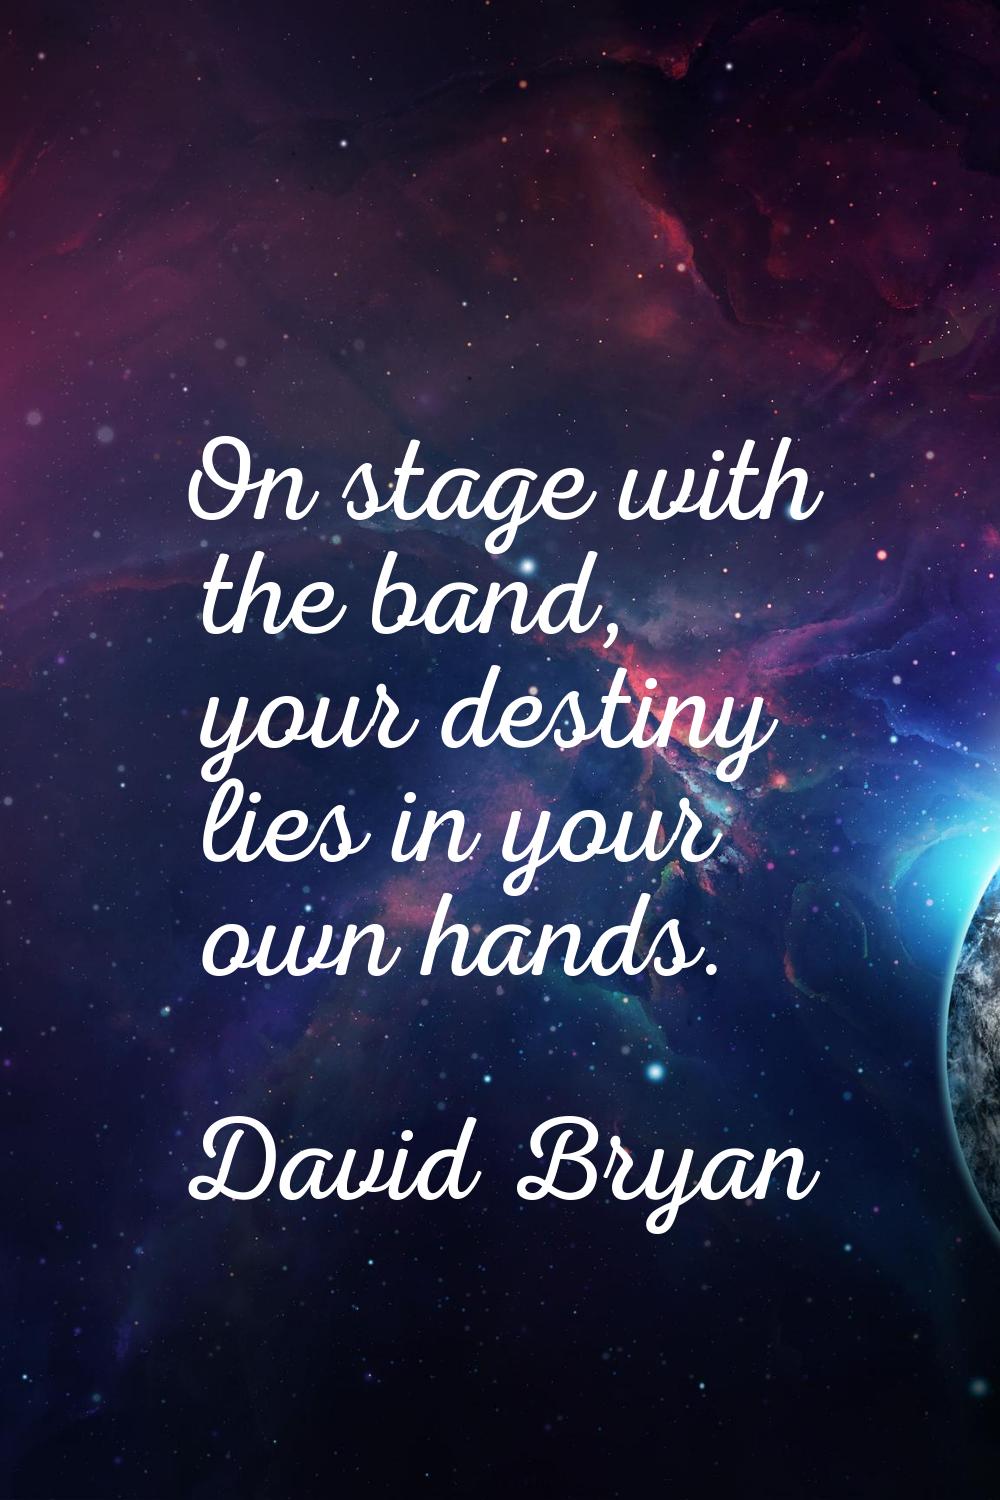 On stage with the band, your destiny lies in your own hands.